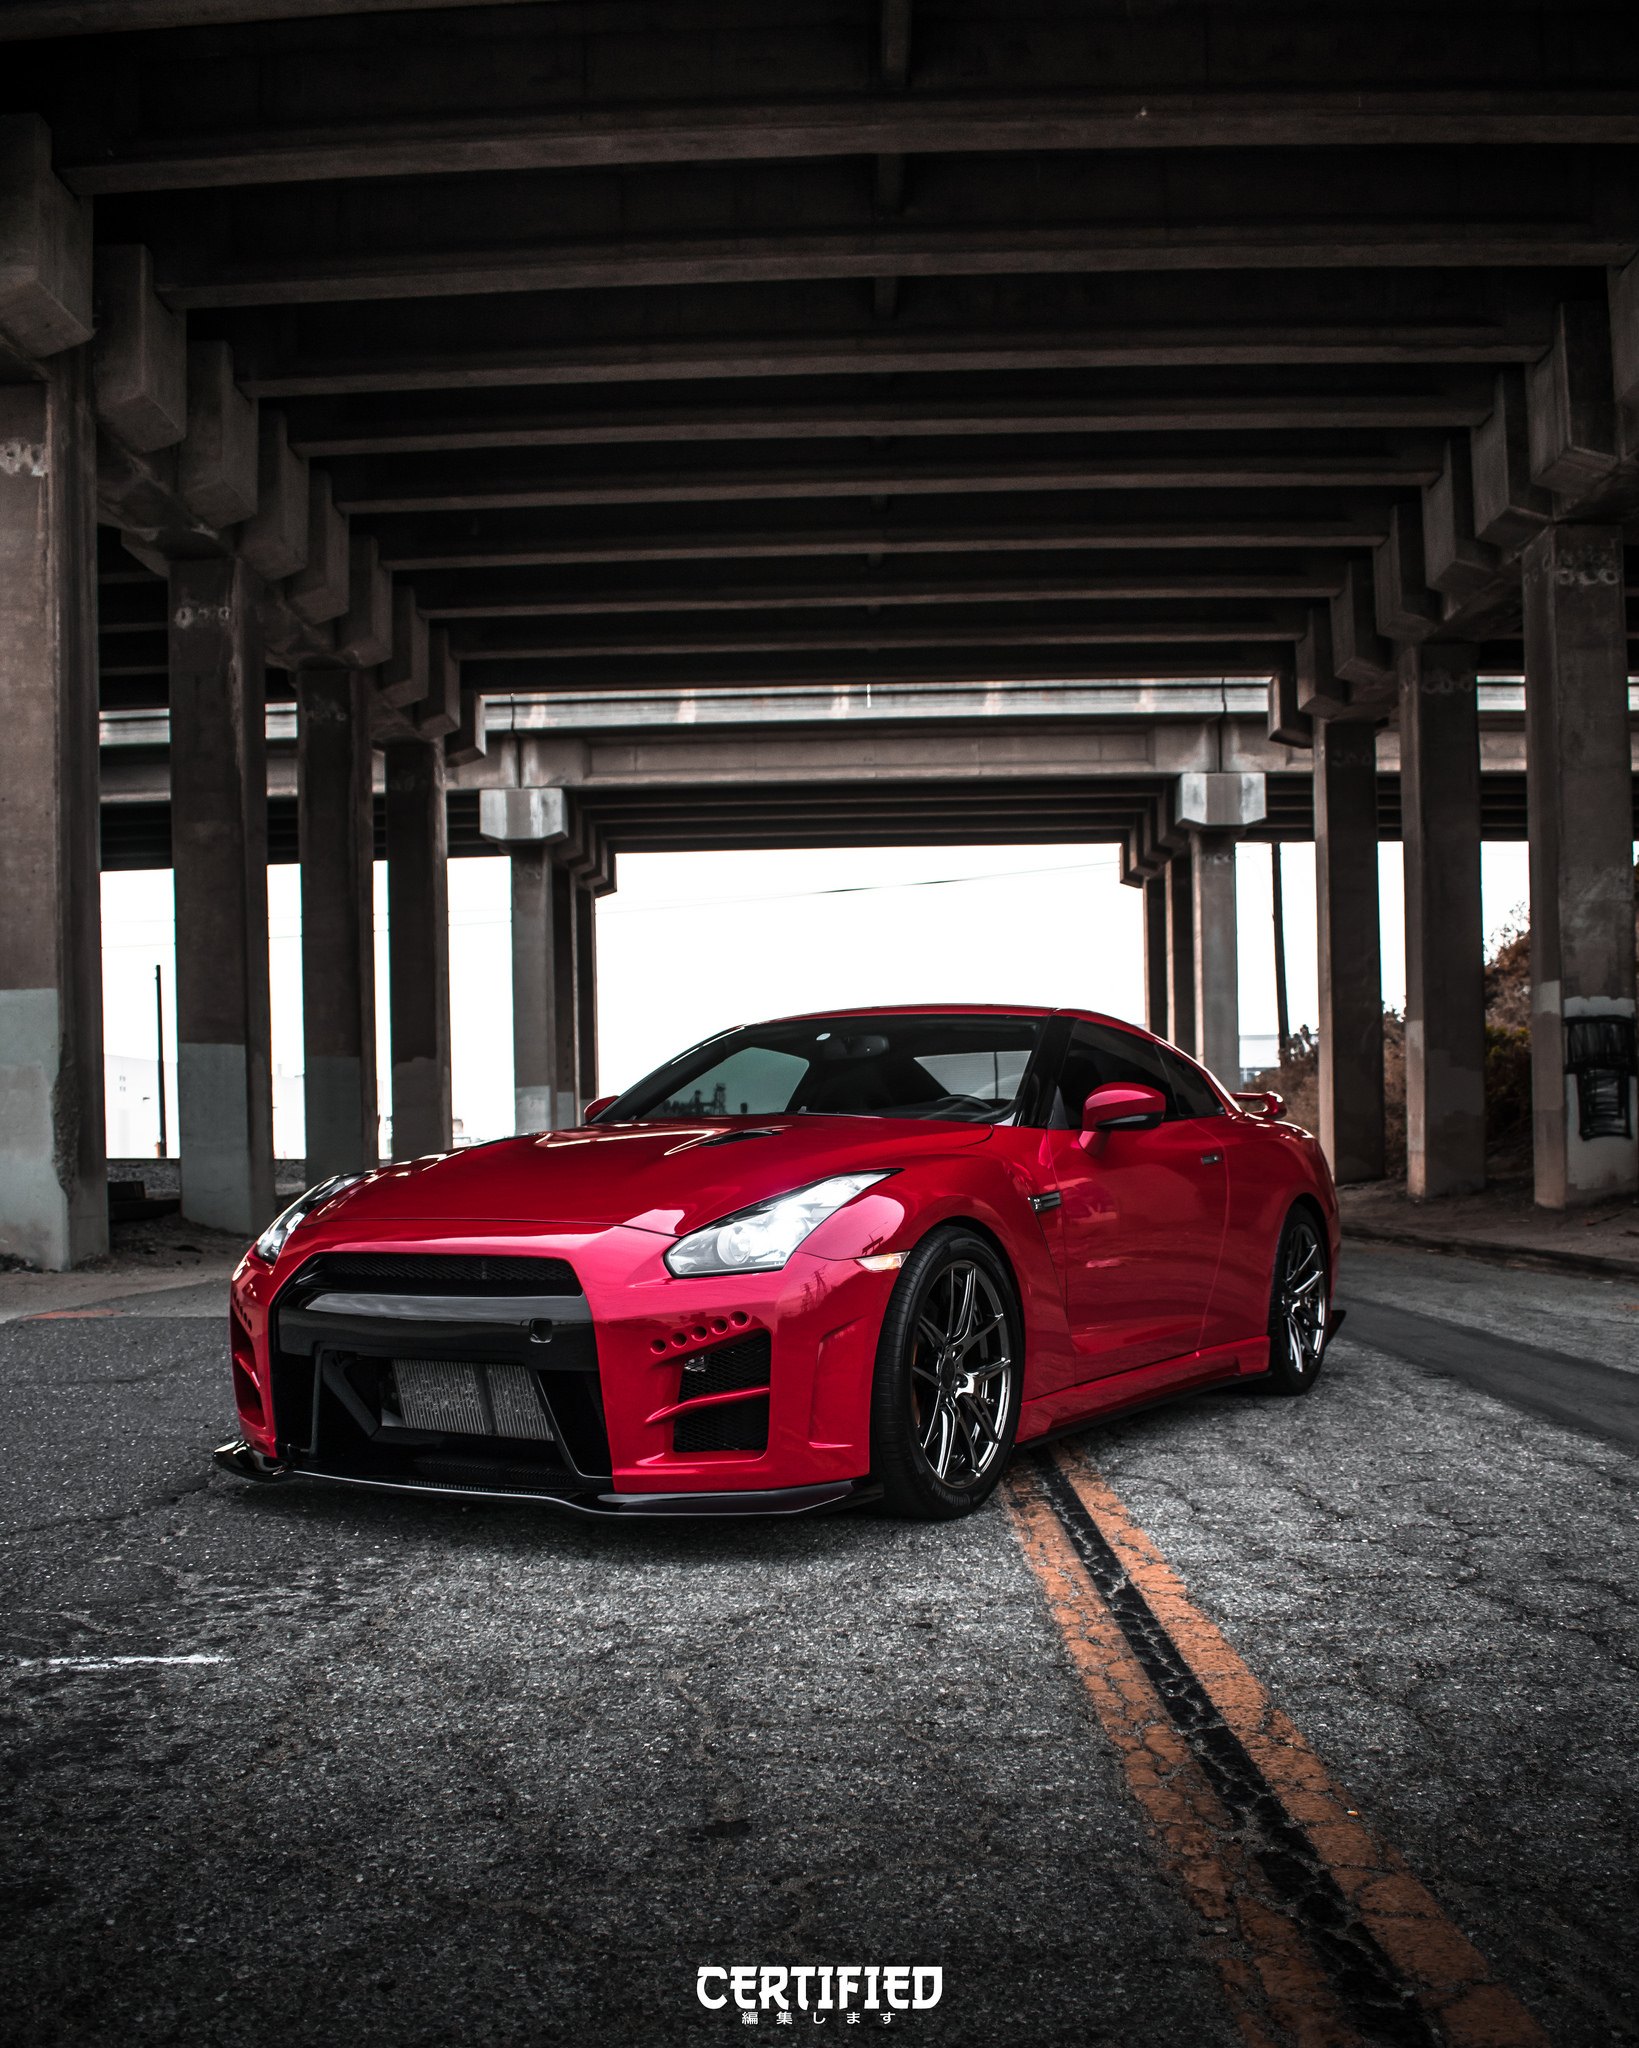 Crystal Clear Headlights on Red Nissan GT-R - Photo by Ace Alloy Wheels